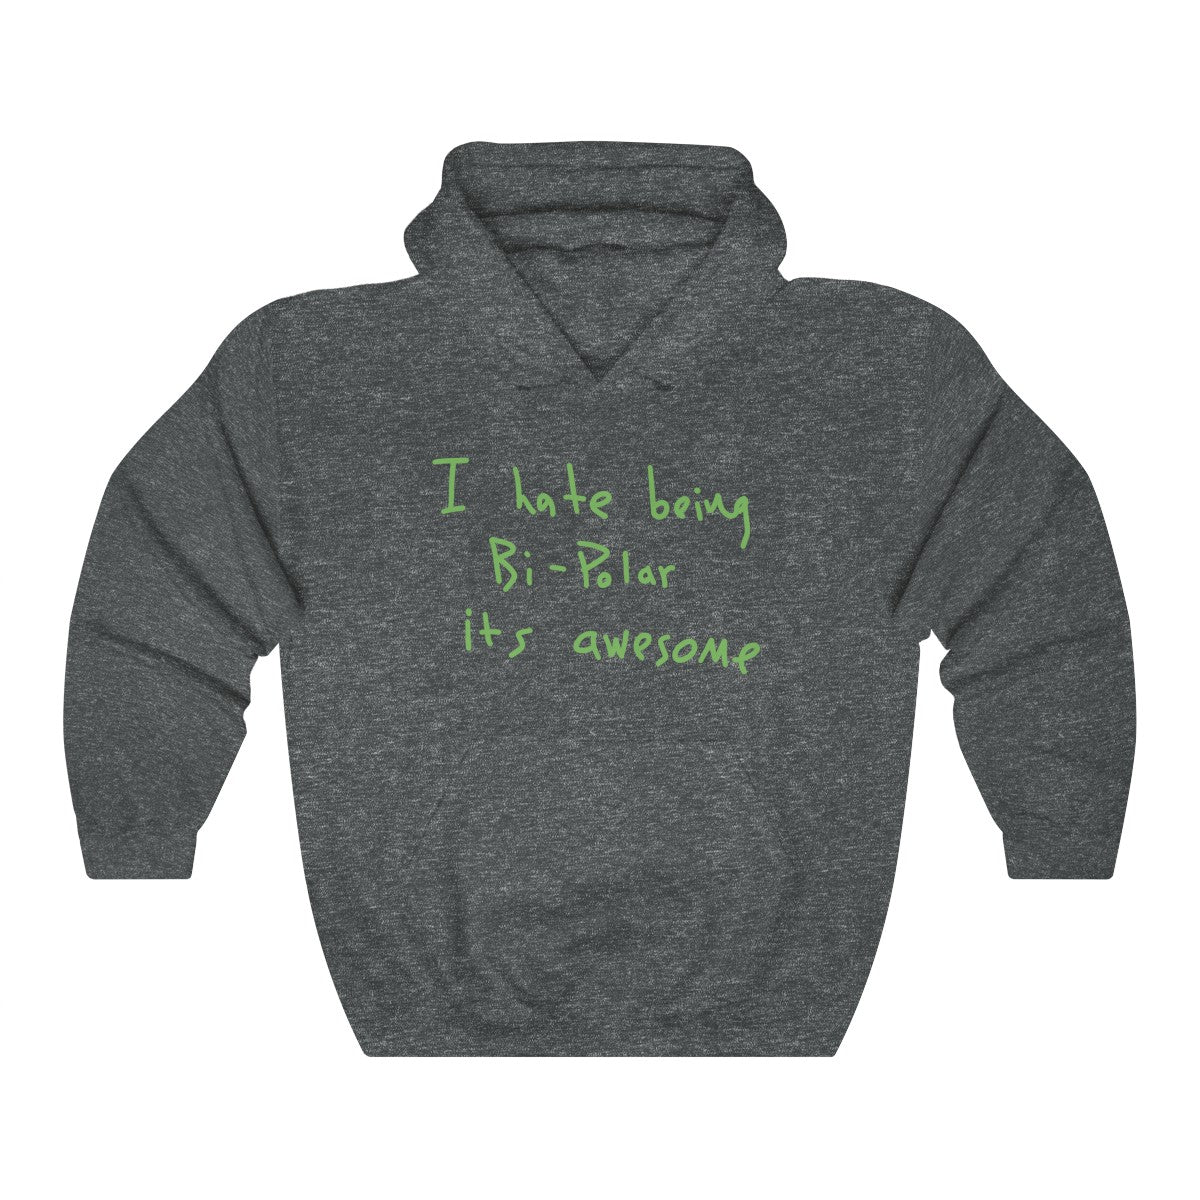 I hate being Bi-Polar it's awesome Kanye West inspired Heavy Blend™ Hoodie-Dark Heather-S-Archethype